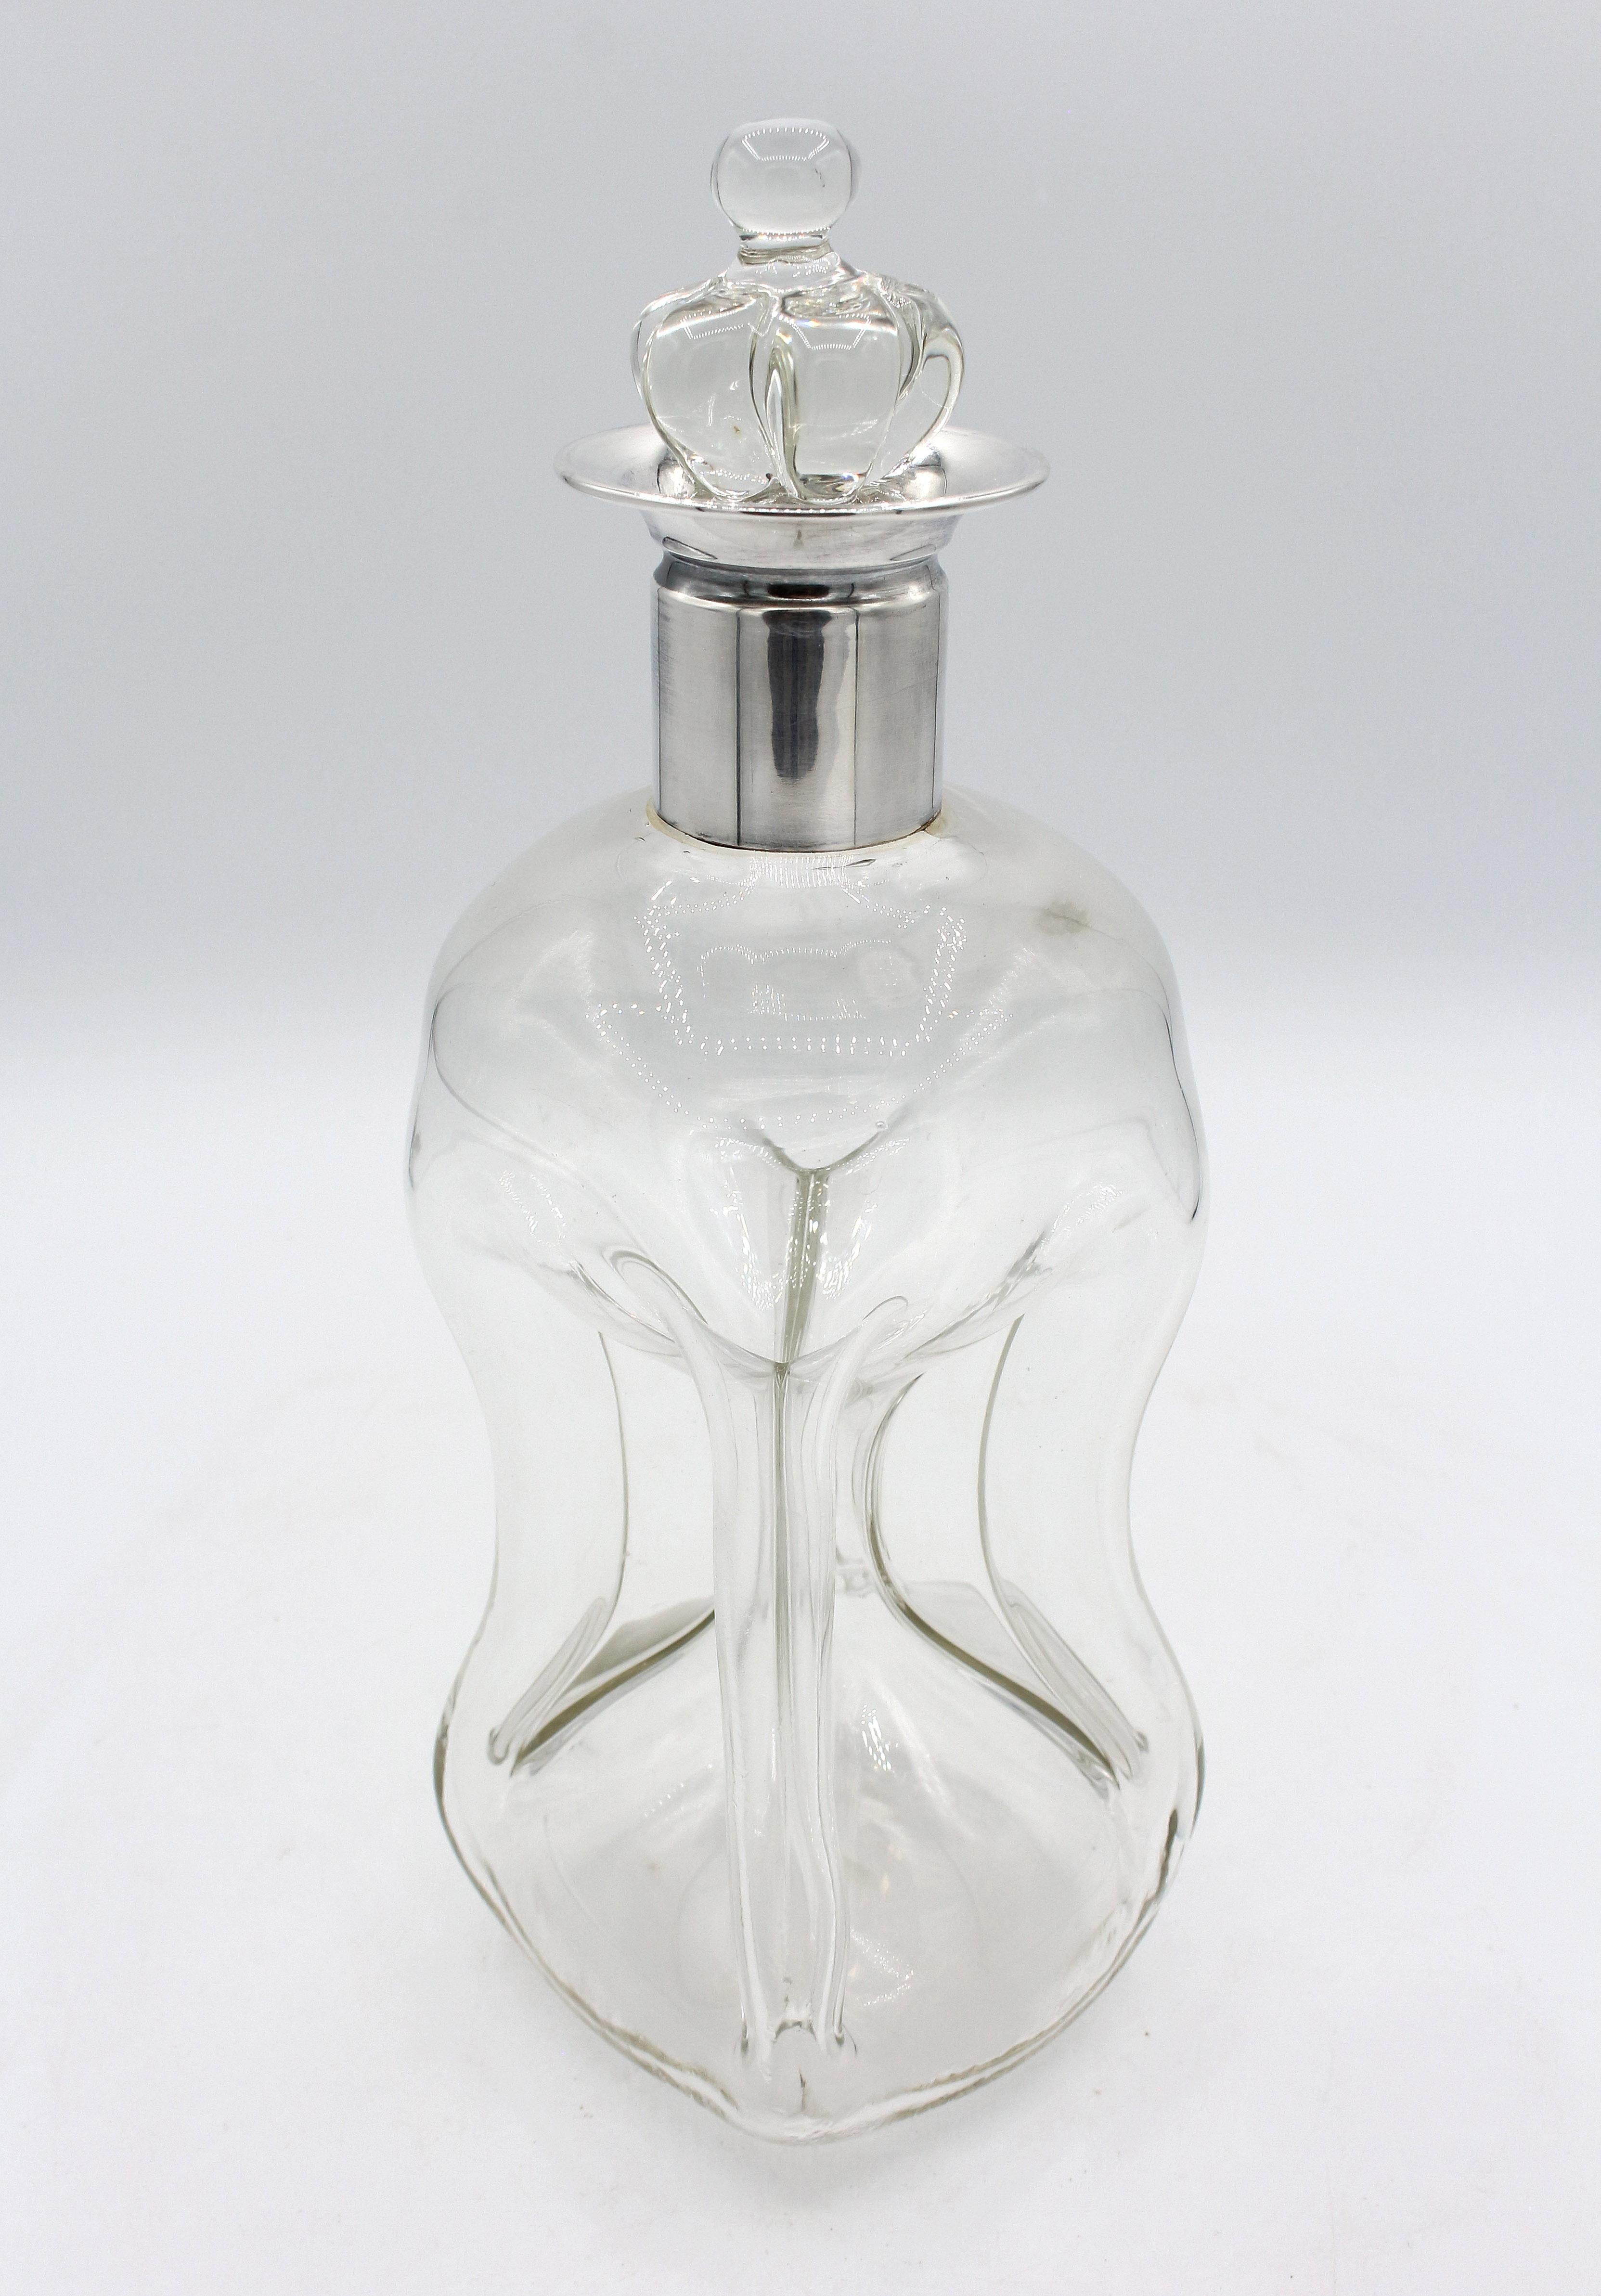 1951 Danish Blown Glass & Silver Decanter by E. Dragsted In Good Condition For Sale In Chapel Hill, NC